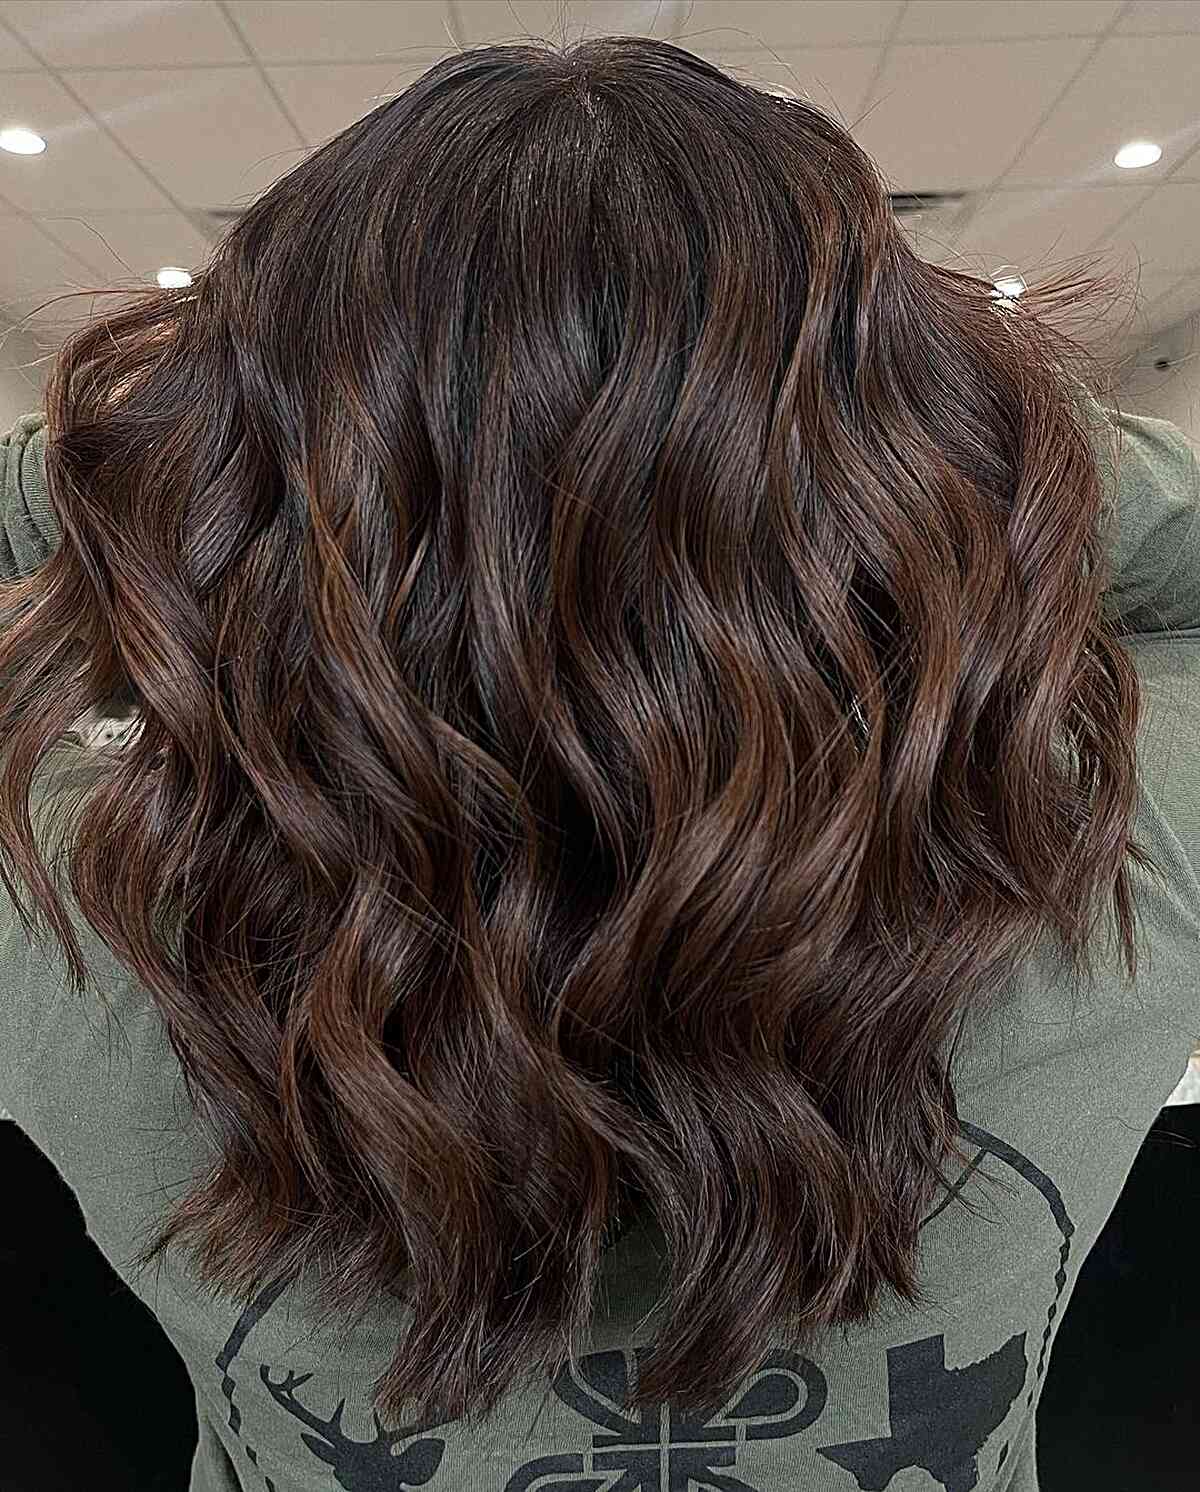 Rich Chocolate Balayage with Brown Chestnut Highlights for Mid-Length Hair with Wavy Layers